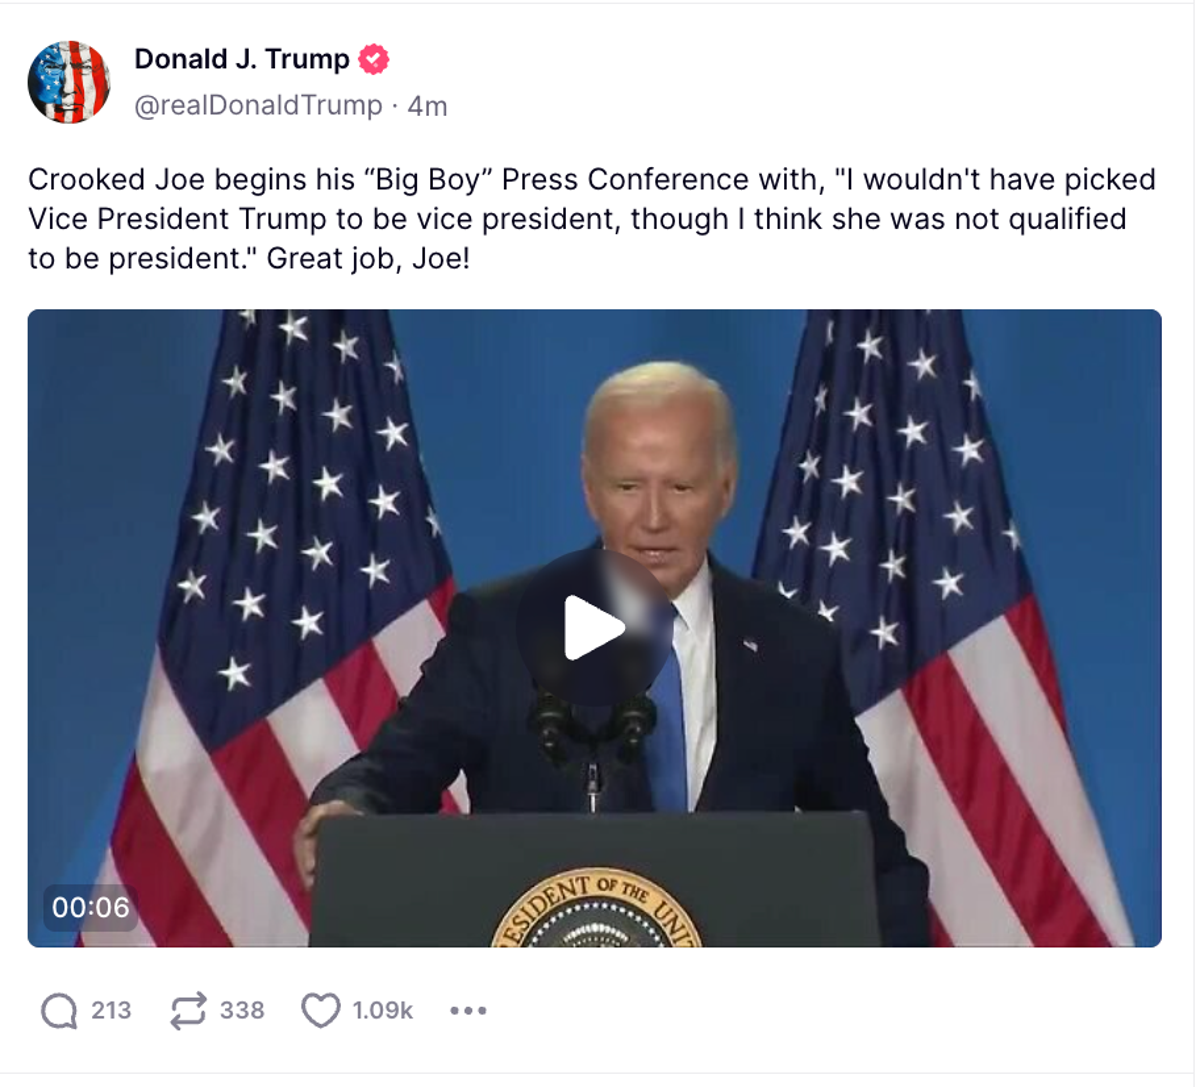 Trump delighted in Biden’s press conference slip-up, during which he confused Kamala Harris with his political rival (@realDonaldTrump)